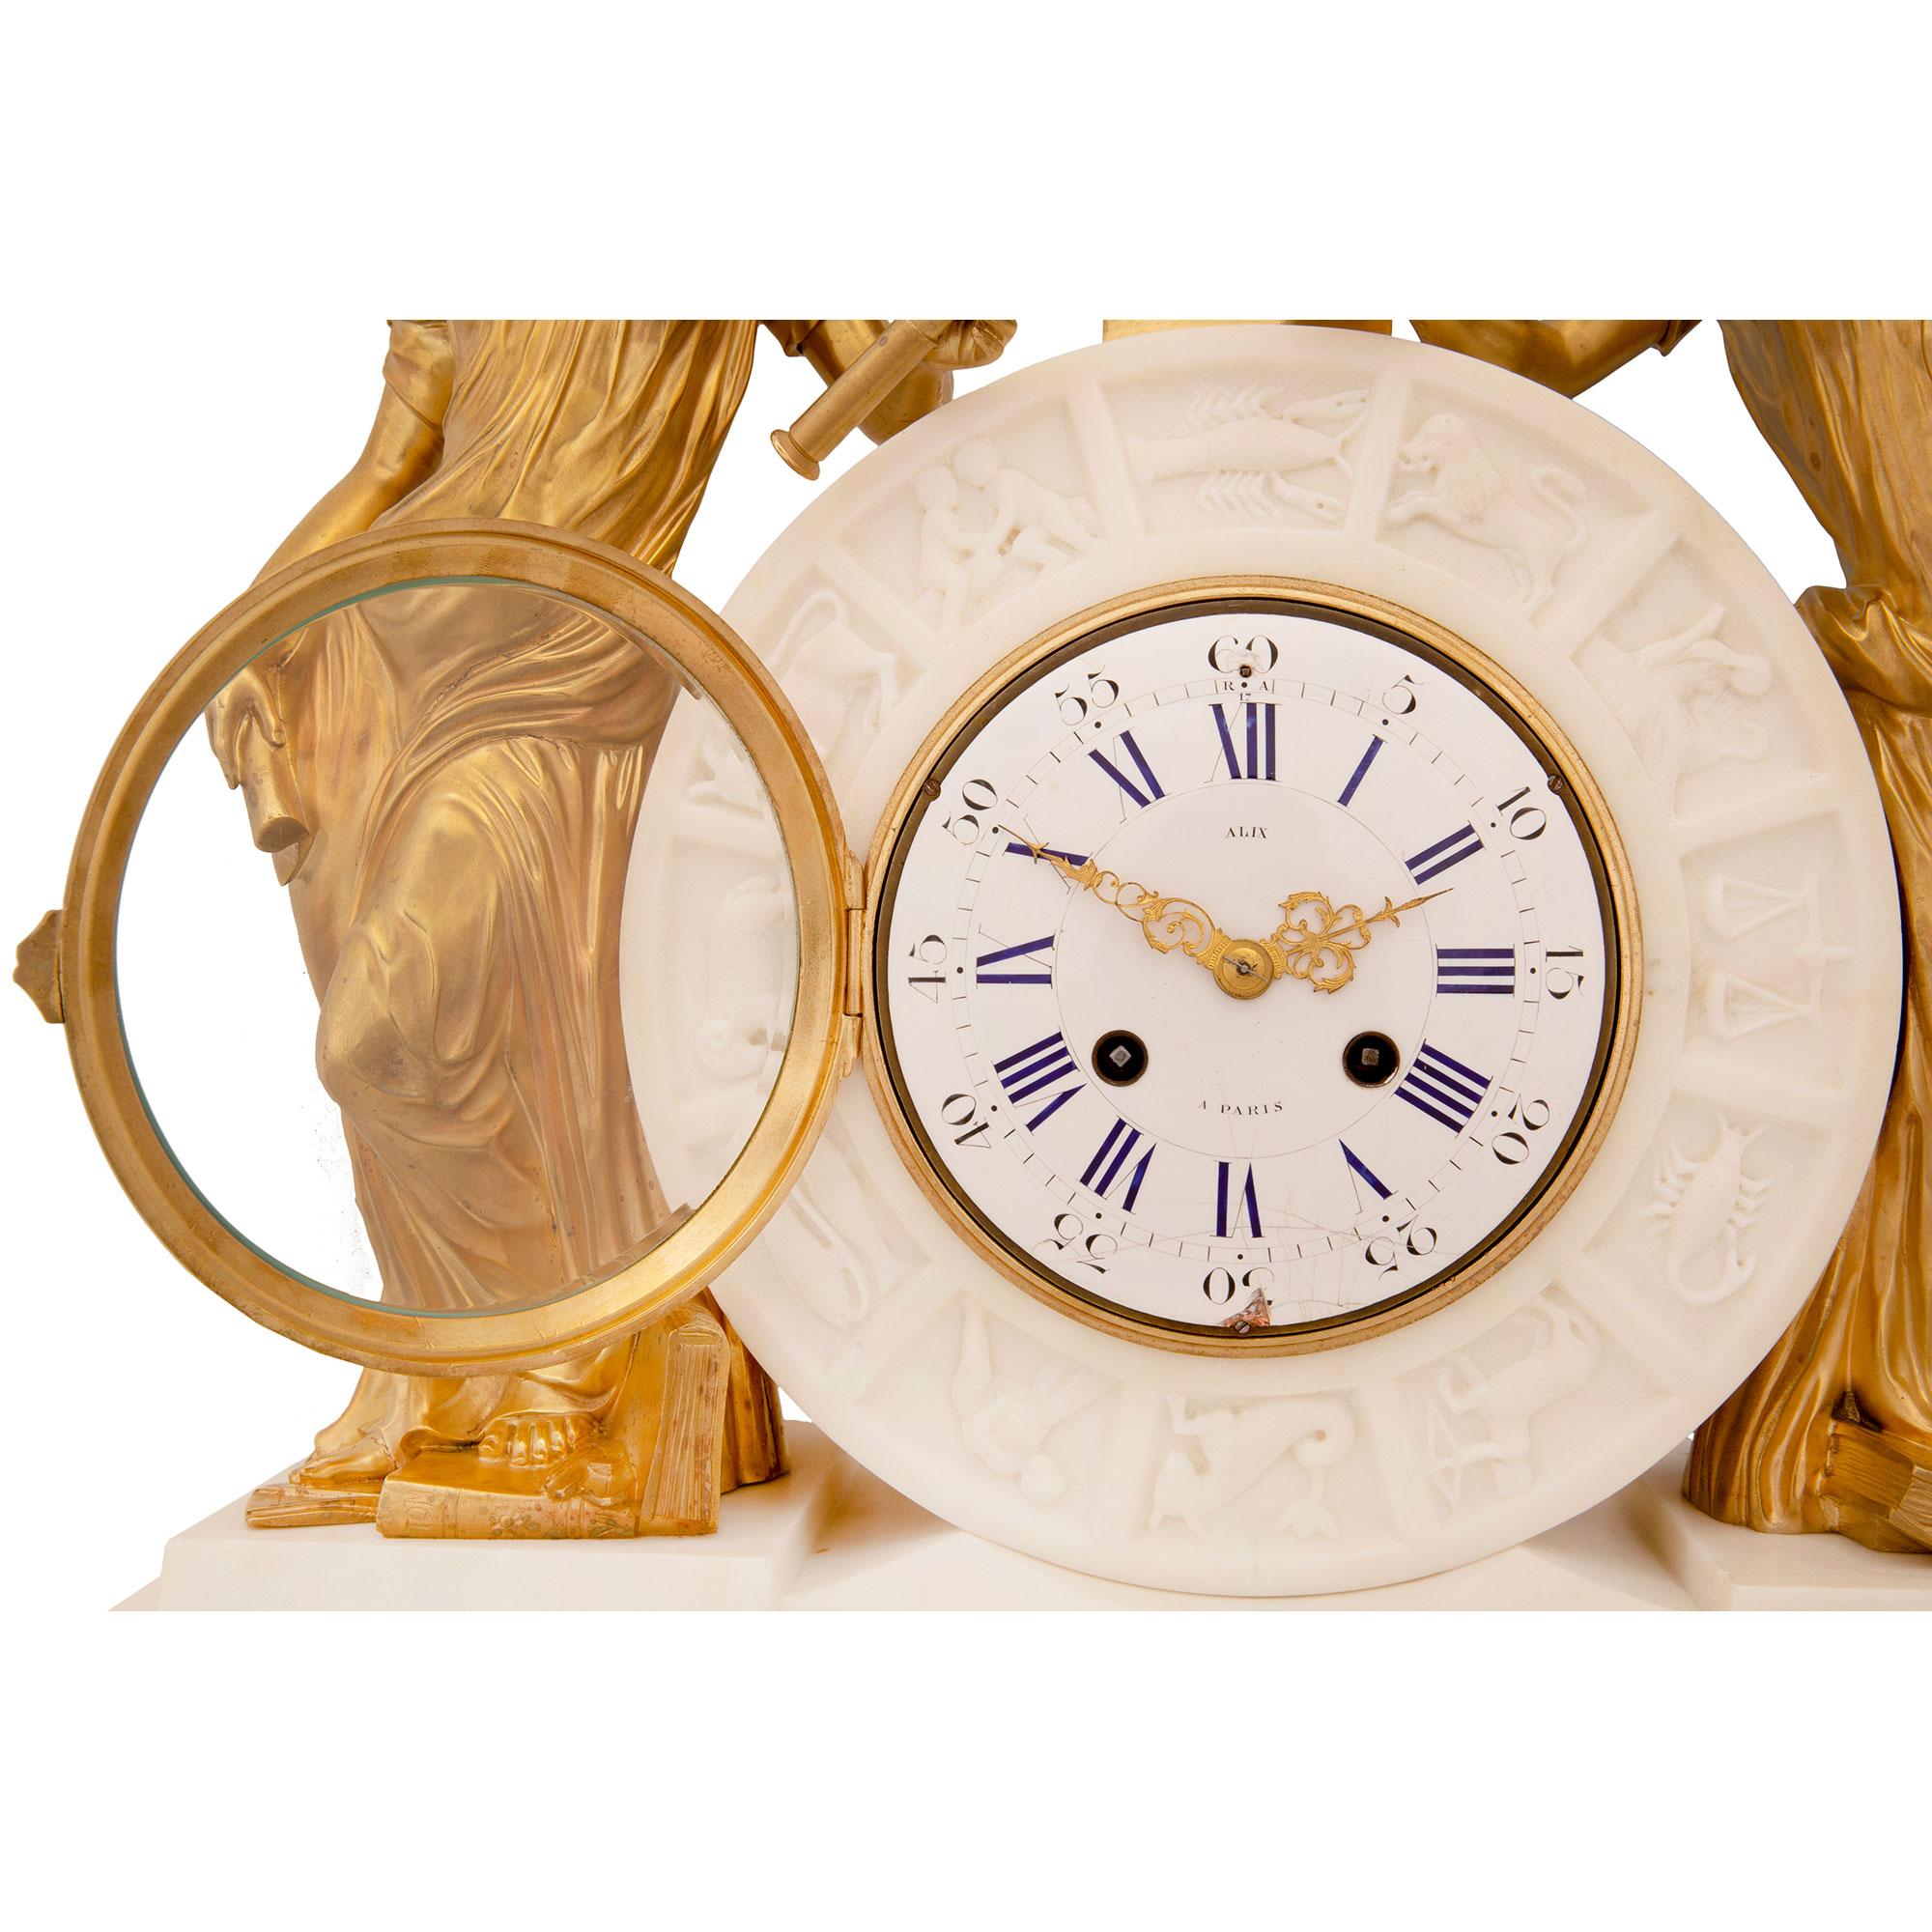 French 19th Century Louis XVI Style Marble and Ormolu Clock, by Alix À, Paris For Sale 4